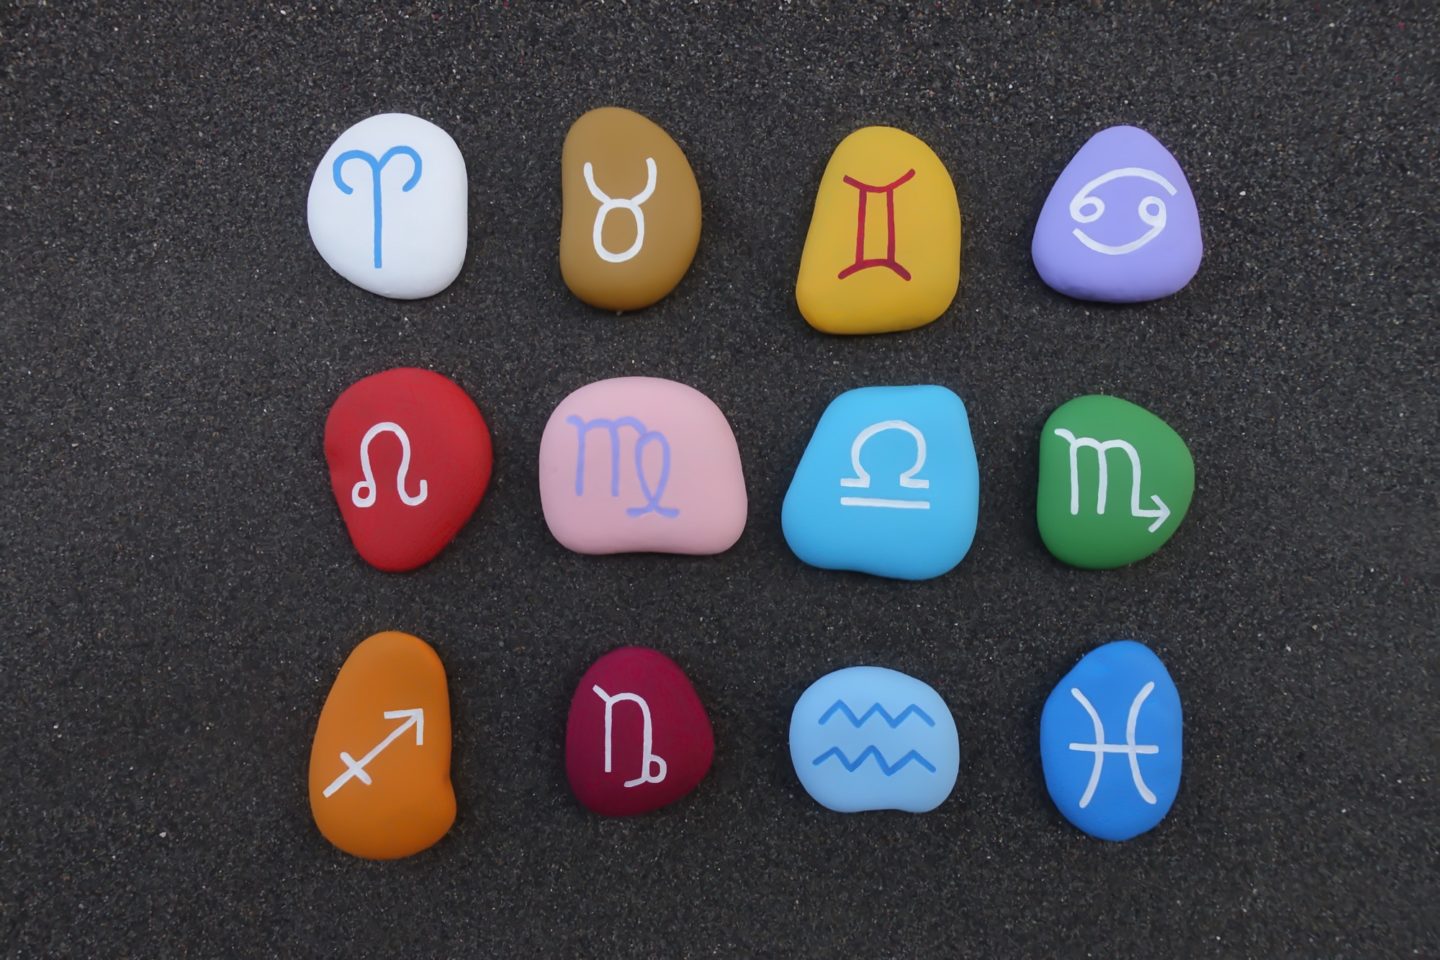 Astrological chinese signs painted and graved on stones over black volcanic sand